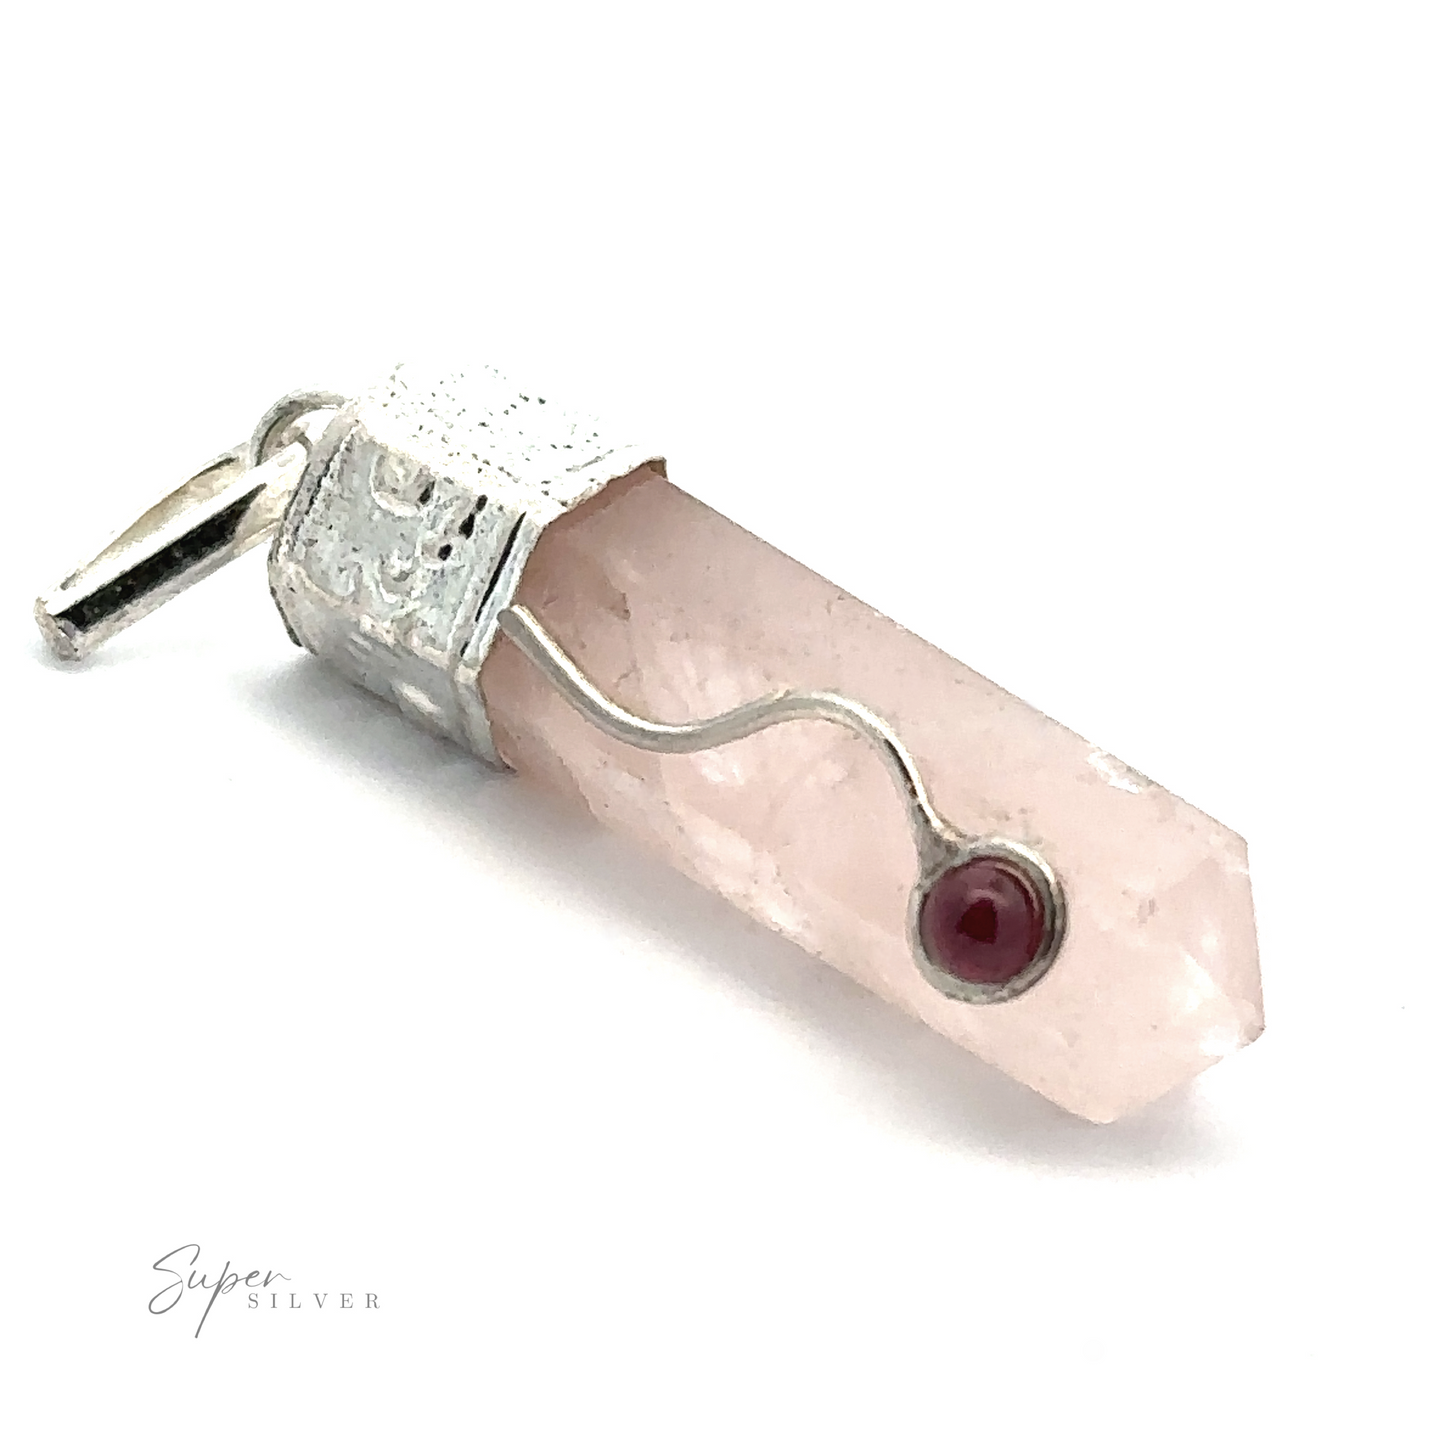 
                  
                    A pale pink Crystal Pendant with Decorative Bail with a pointed end, silver cap, and a small garnet detail attached by a silver wire. The brand "Super Silver" is visible on the bottom left.
                  
                